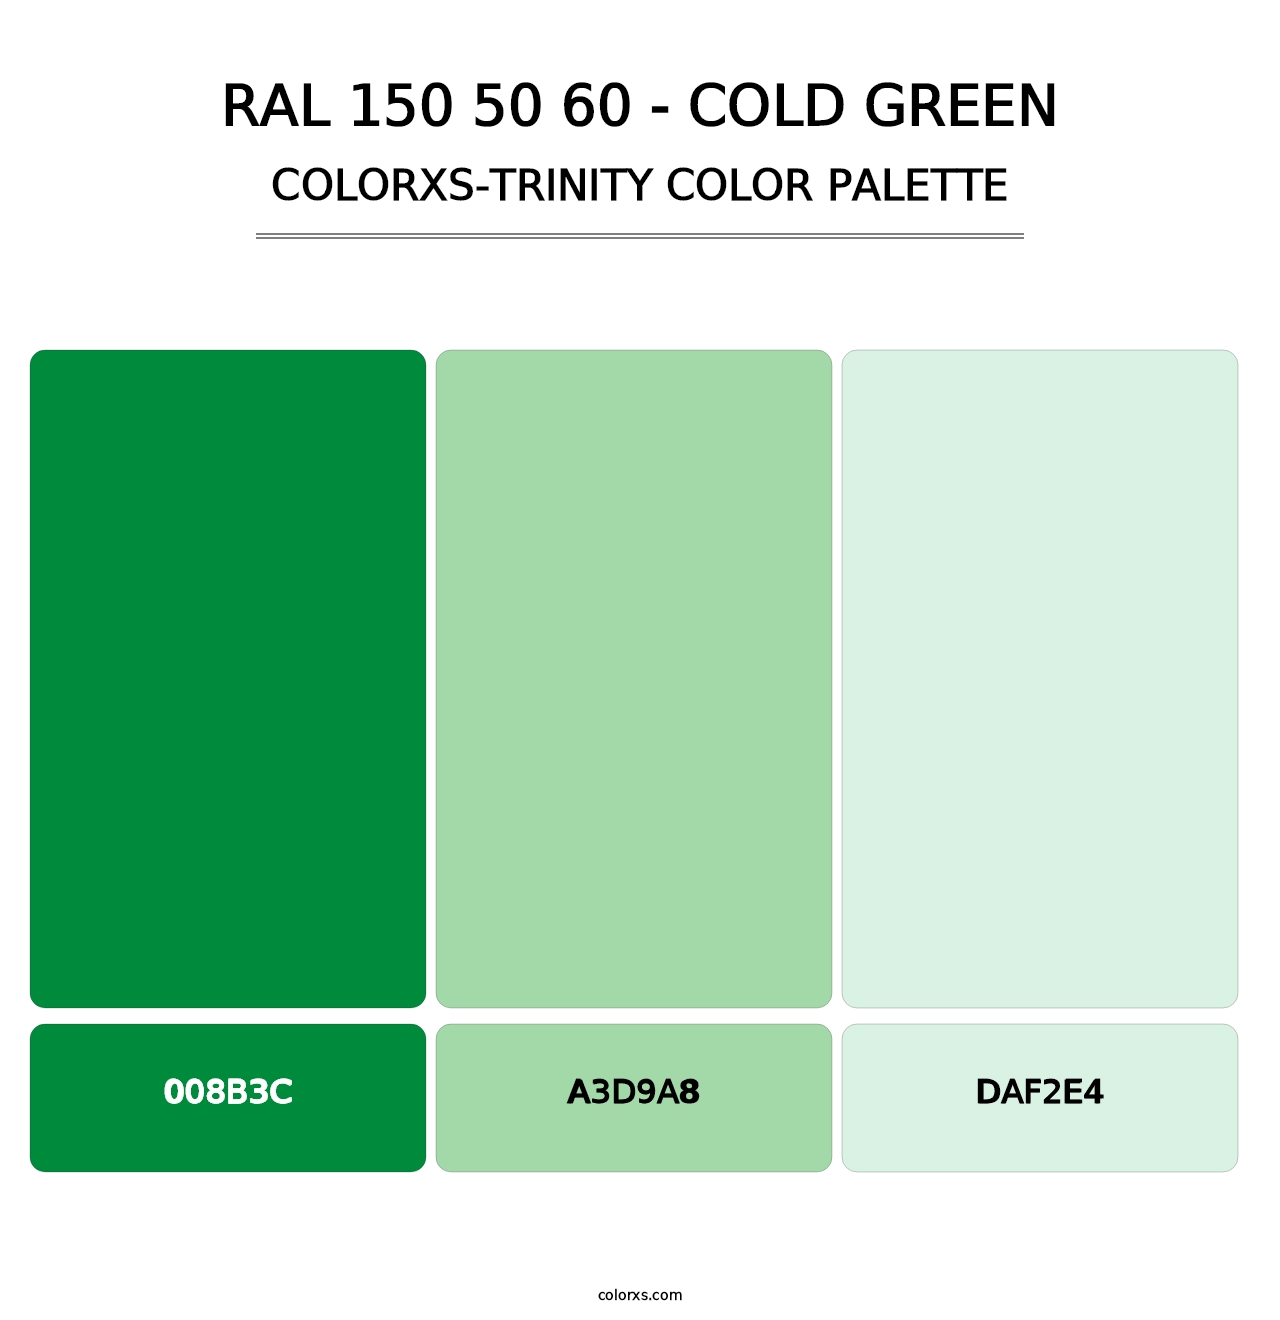 RAL 150 50 60 - Cold Green - Colorxs Trinity Palette